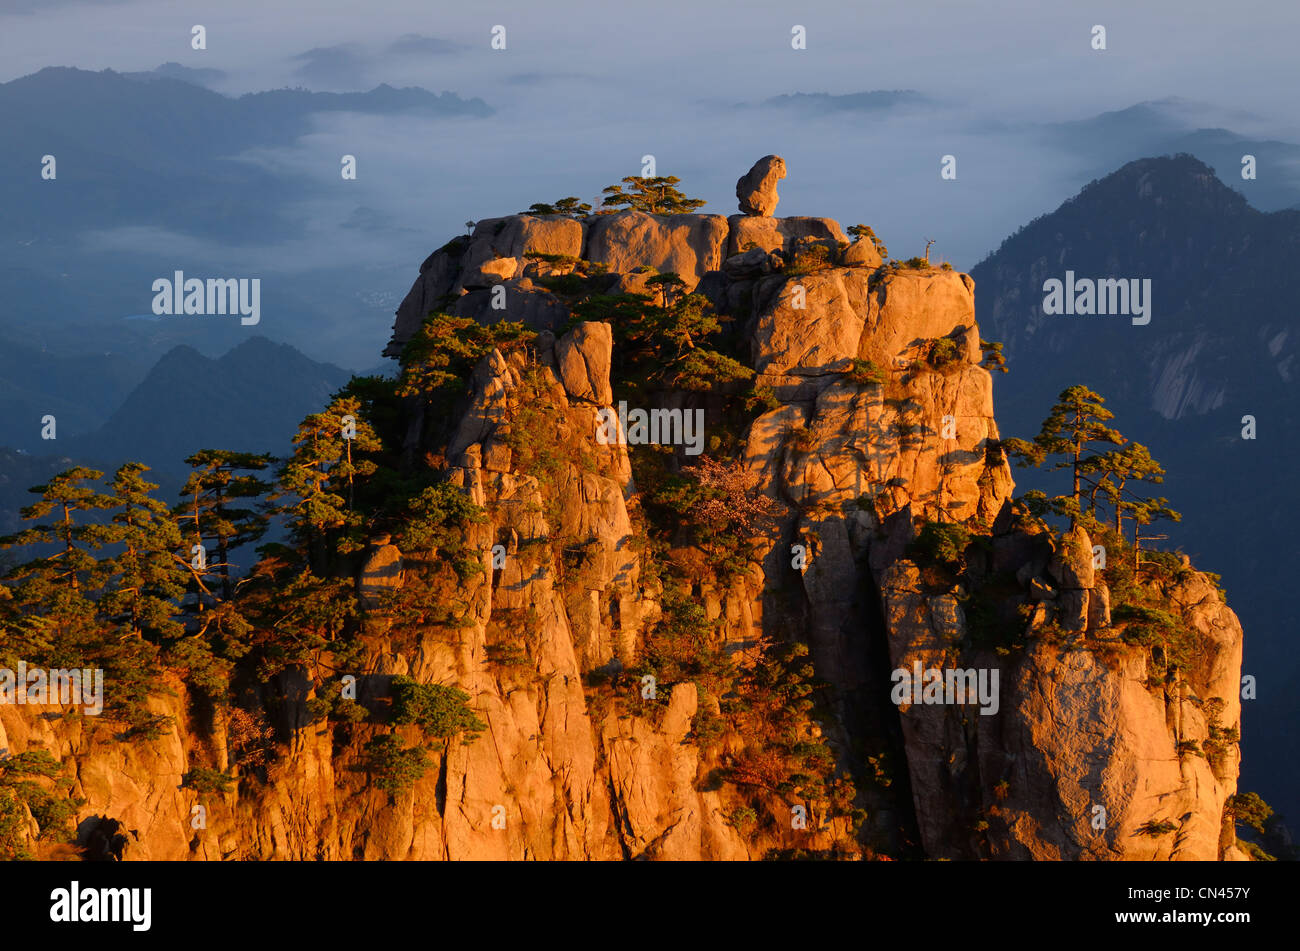 Detail of Monkey watching the Sea Peak at sunrise with fog in valley at Huangshan Yellow Mountain Peoples Republic of China Stock Photo